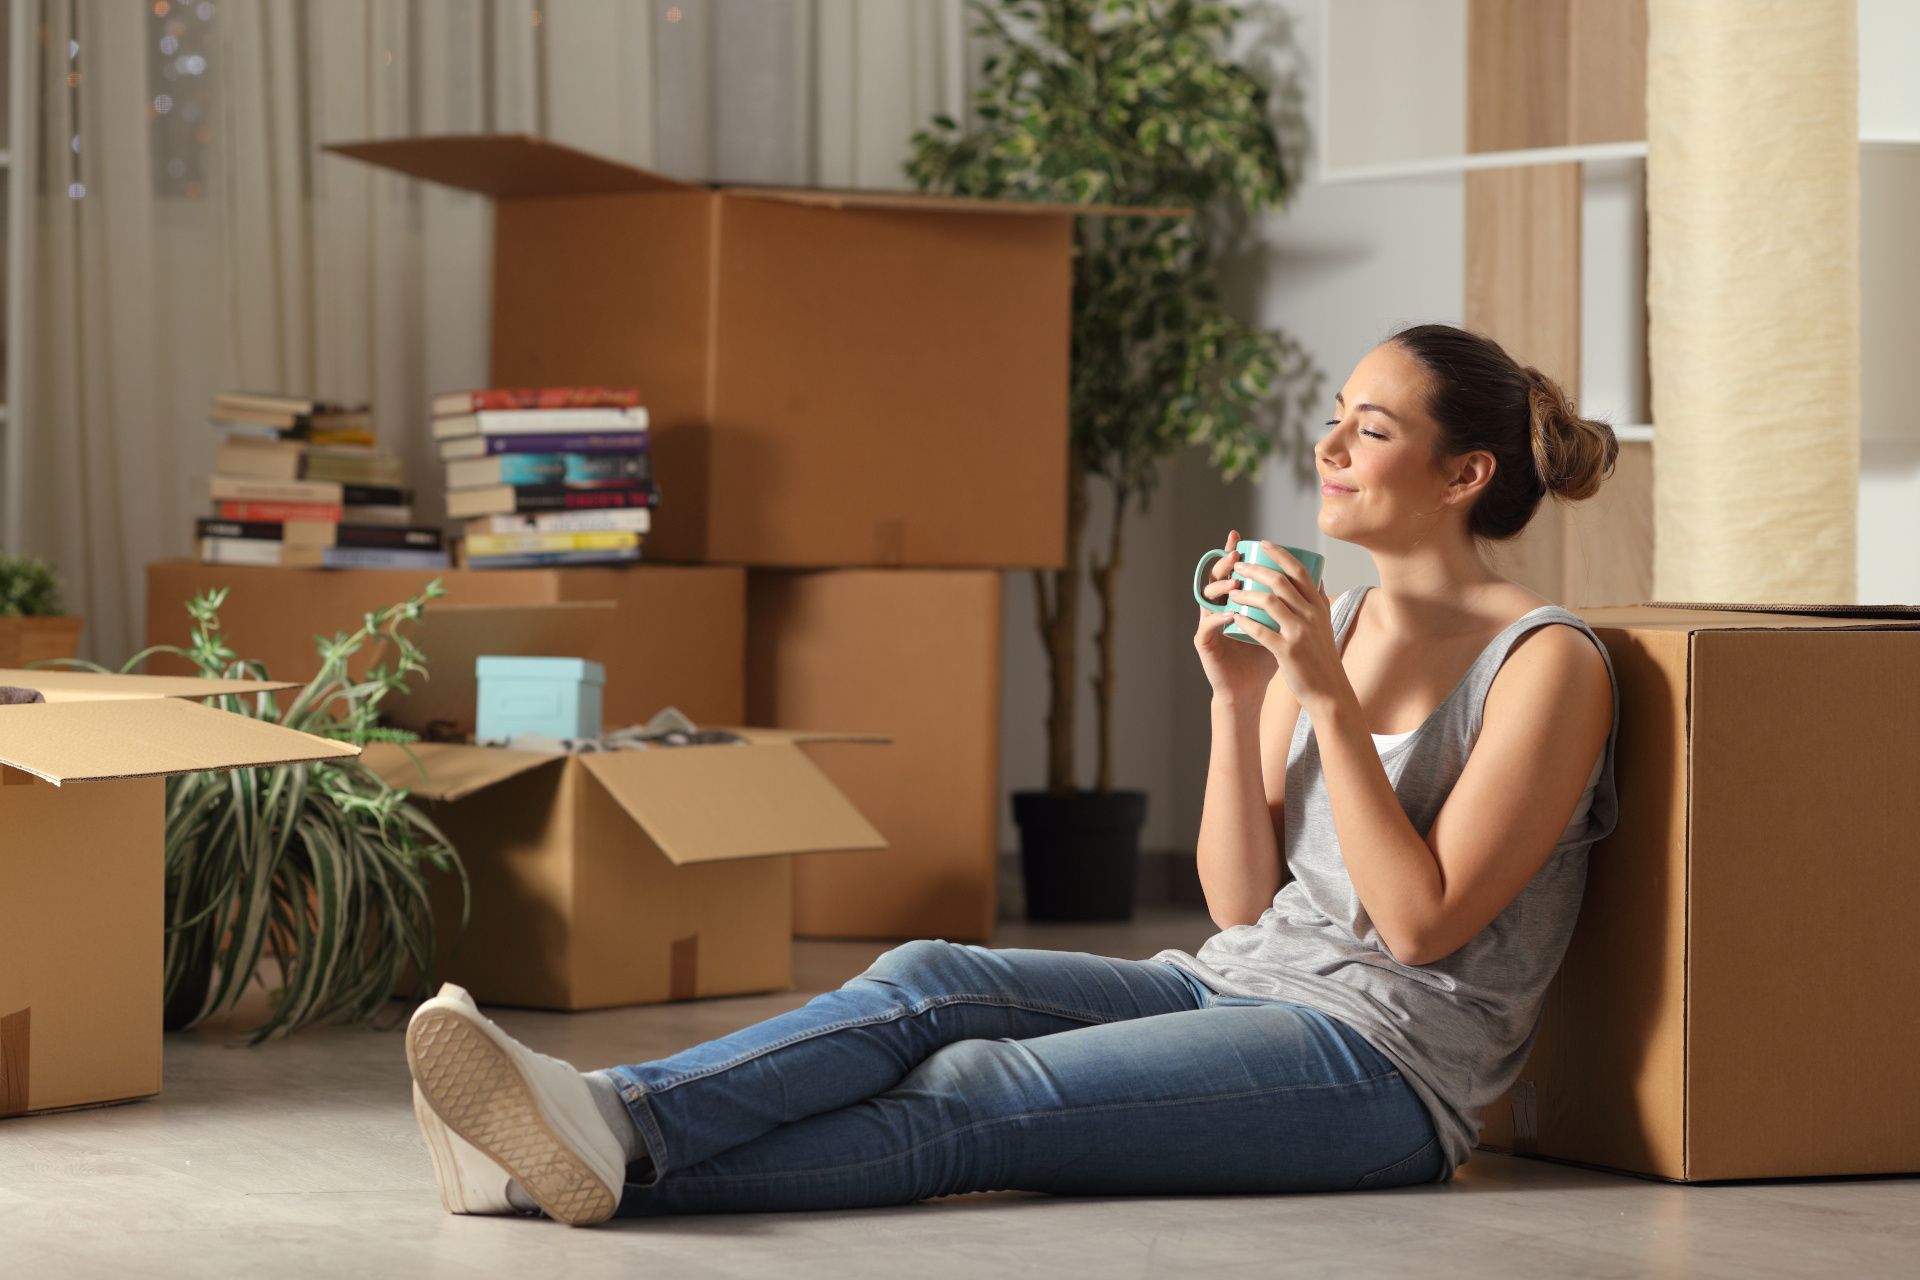 Woman sat by cardboard boxes drinking from cup and smiling